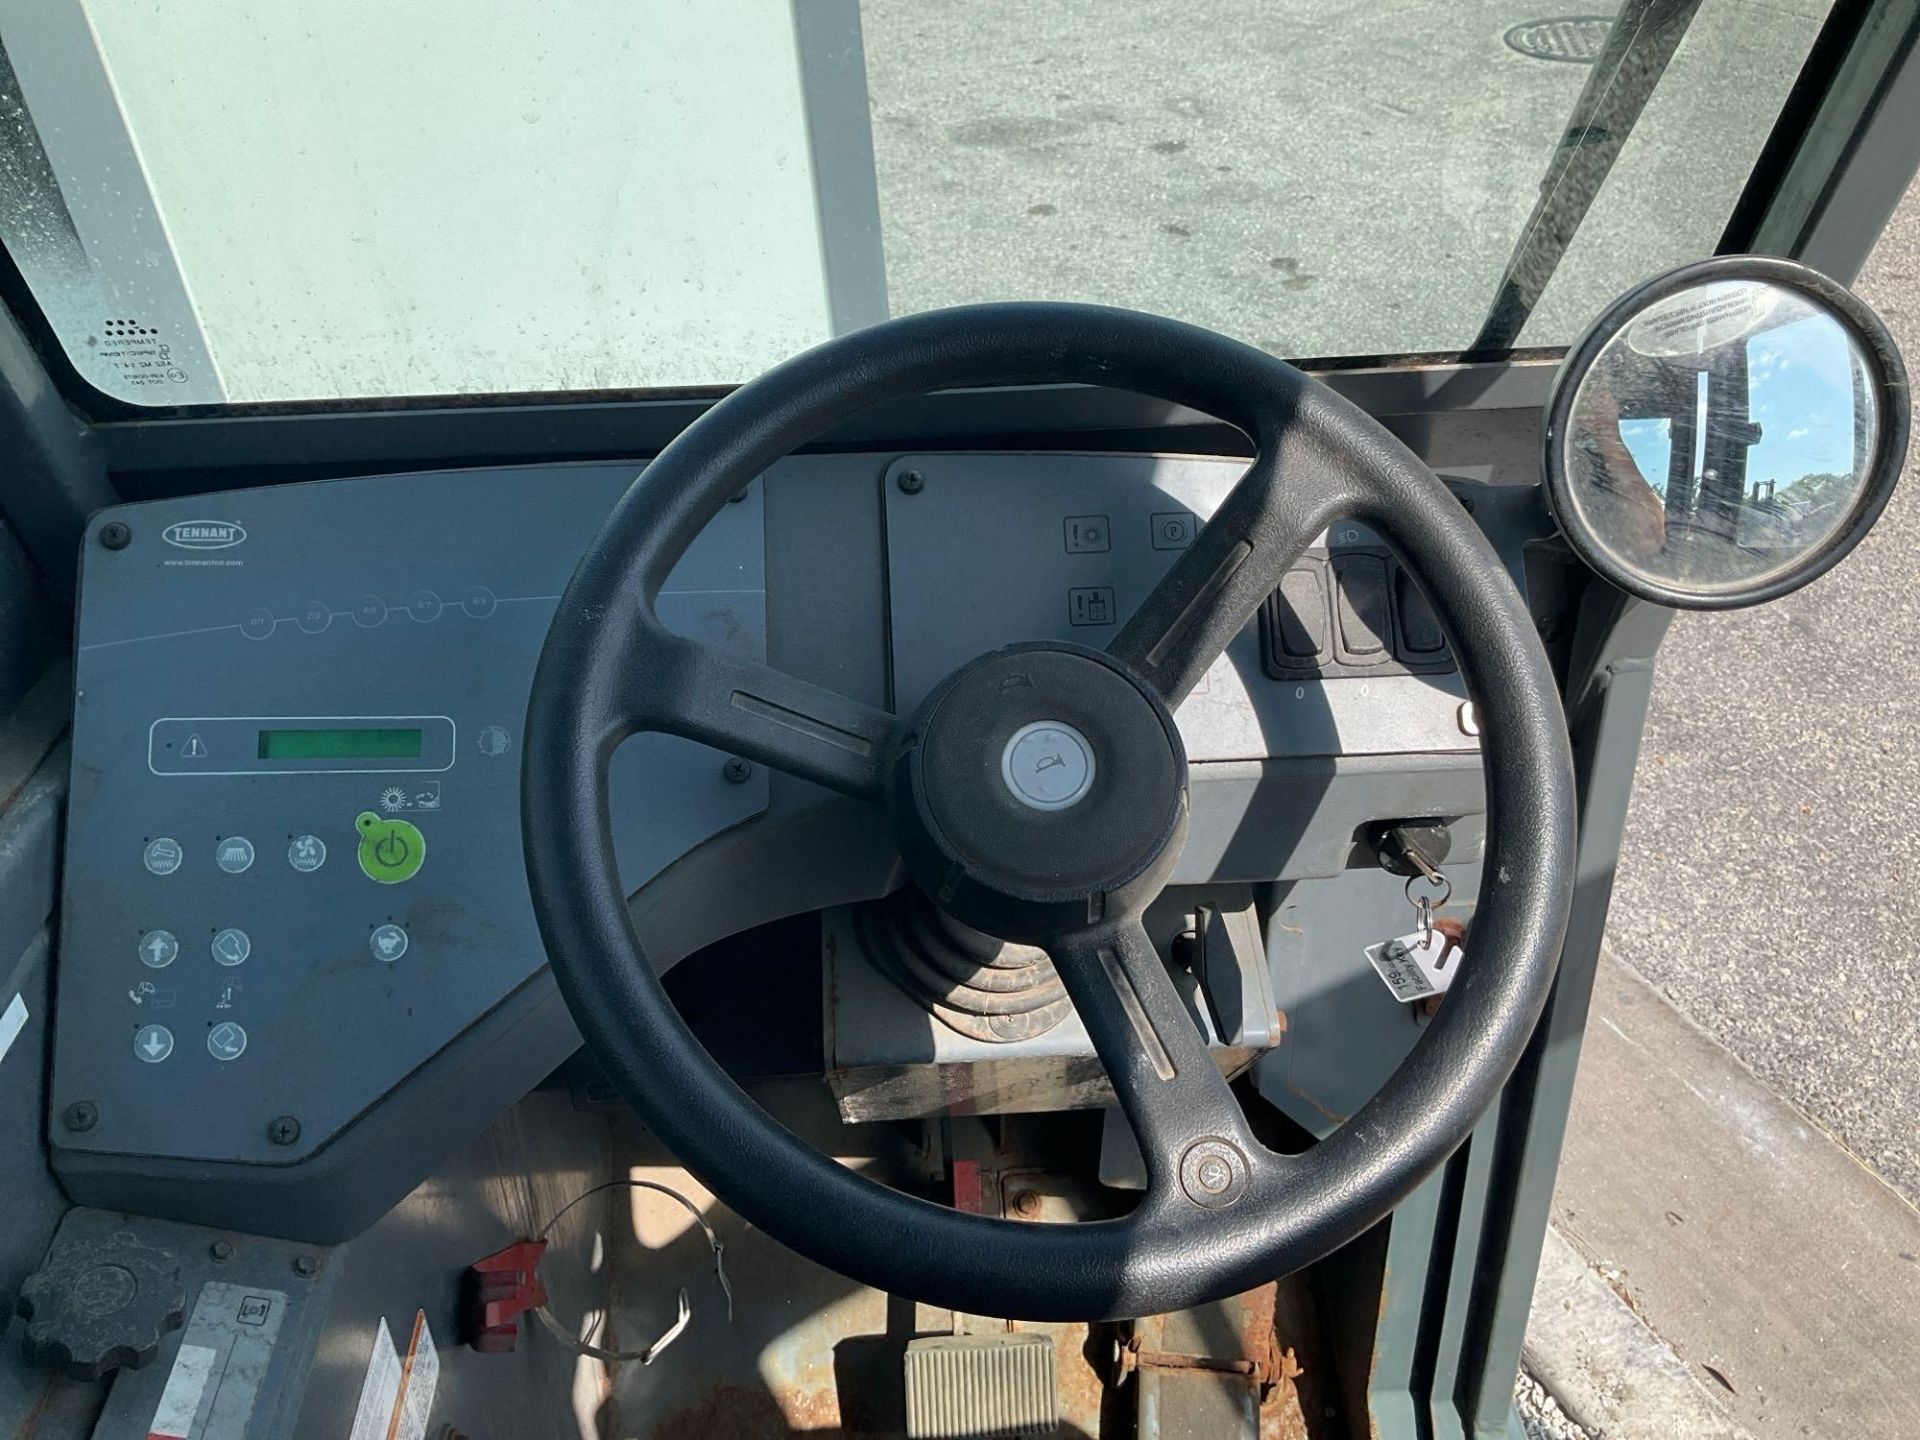 TENNANT RIDE ON SWEEPER MODEL S30, DIESEL, ENCLOSED CAD, TURNS OVER DOES NOT START - Image 10 of 12